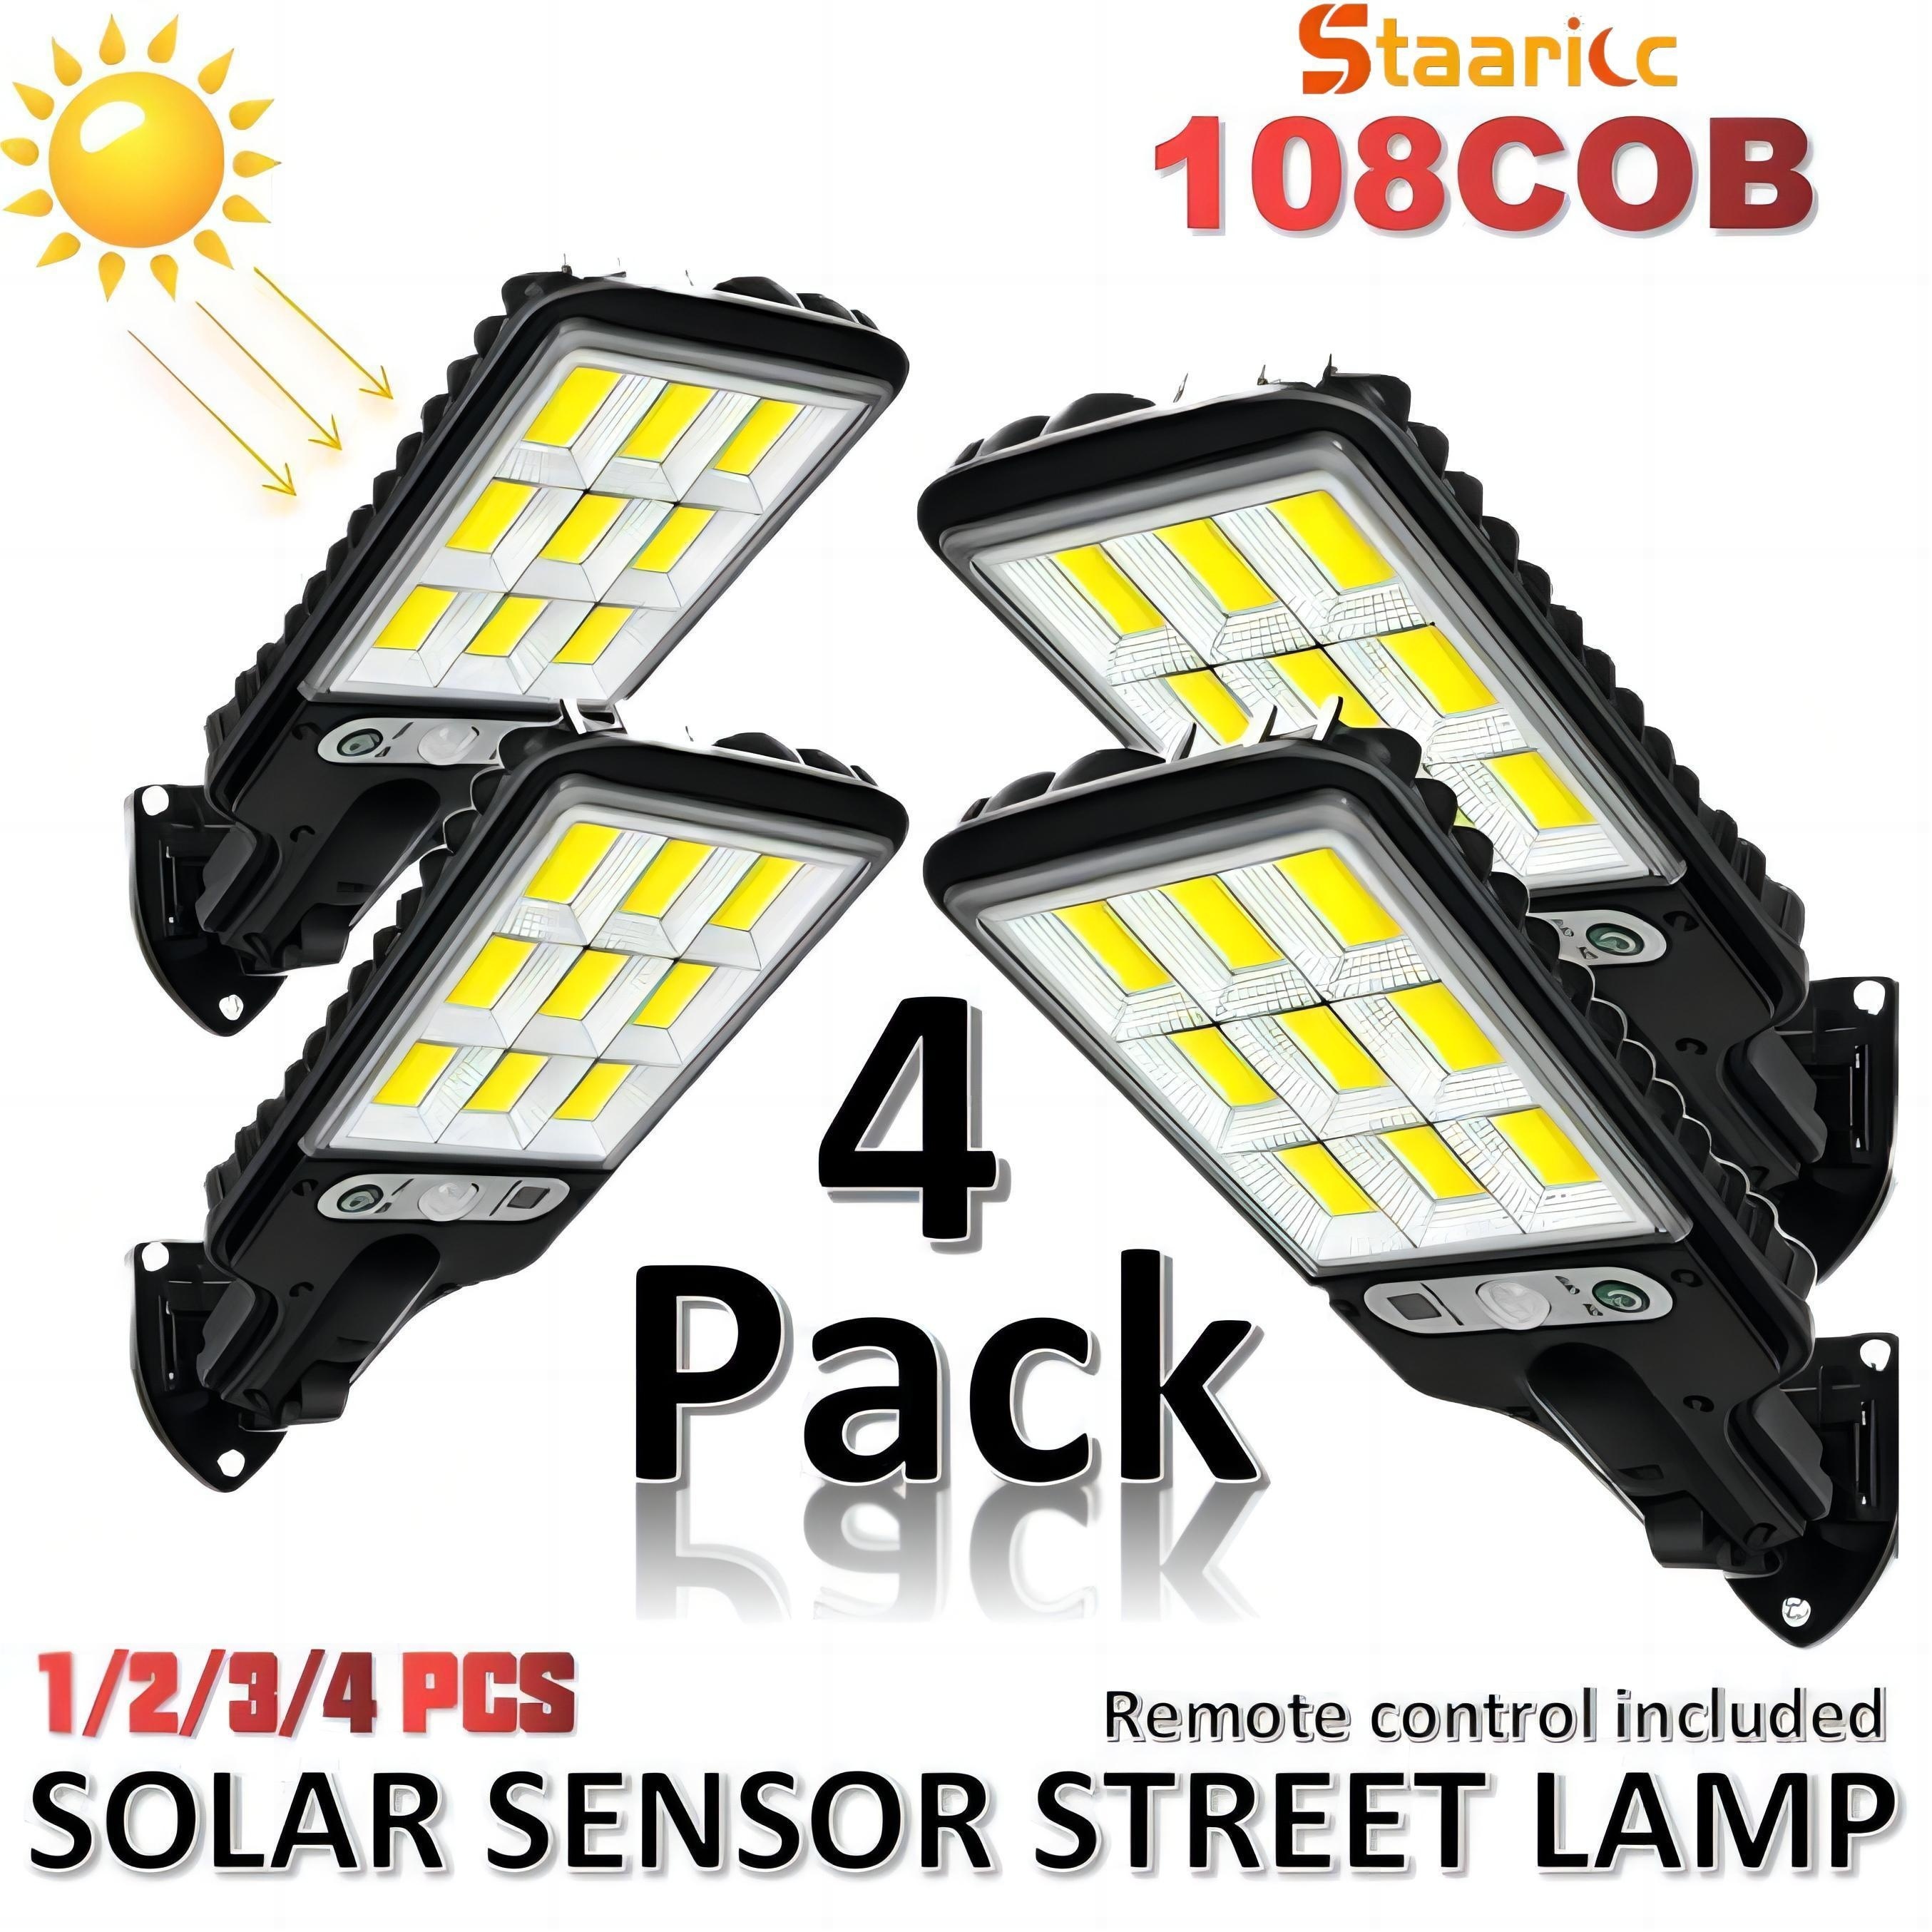 

4/3/2/1 Pack 108cob Solar Pathway Lights, Outdoor Wall Lights, 3 Lighting Modes With Motion Sensor, Solar Sensor Led Pathway Lights For Garden Wall Yard Pathway Safety Lighting